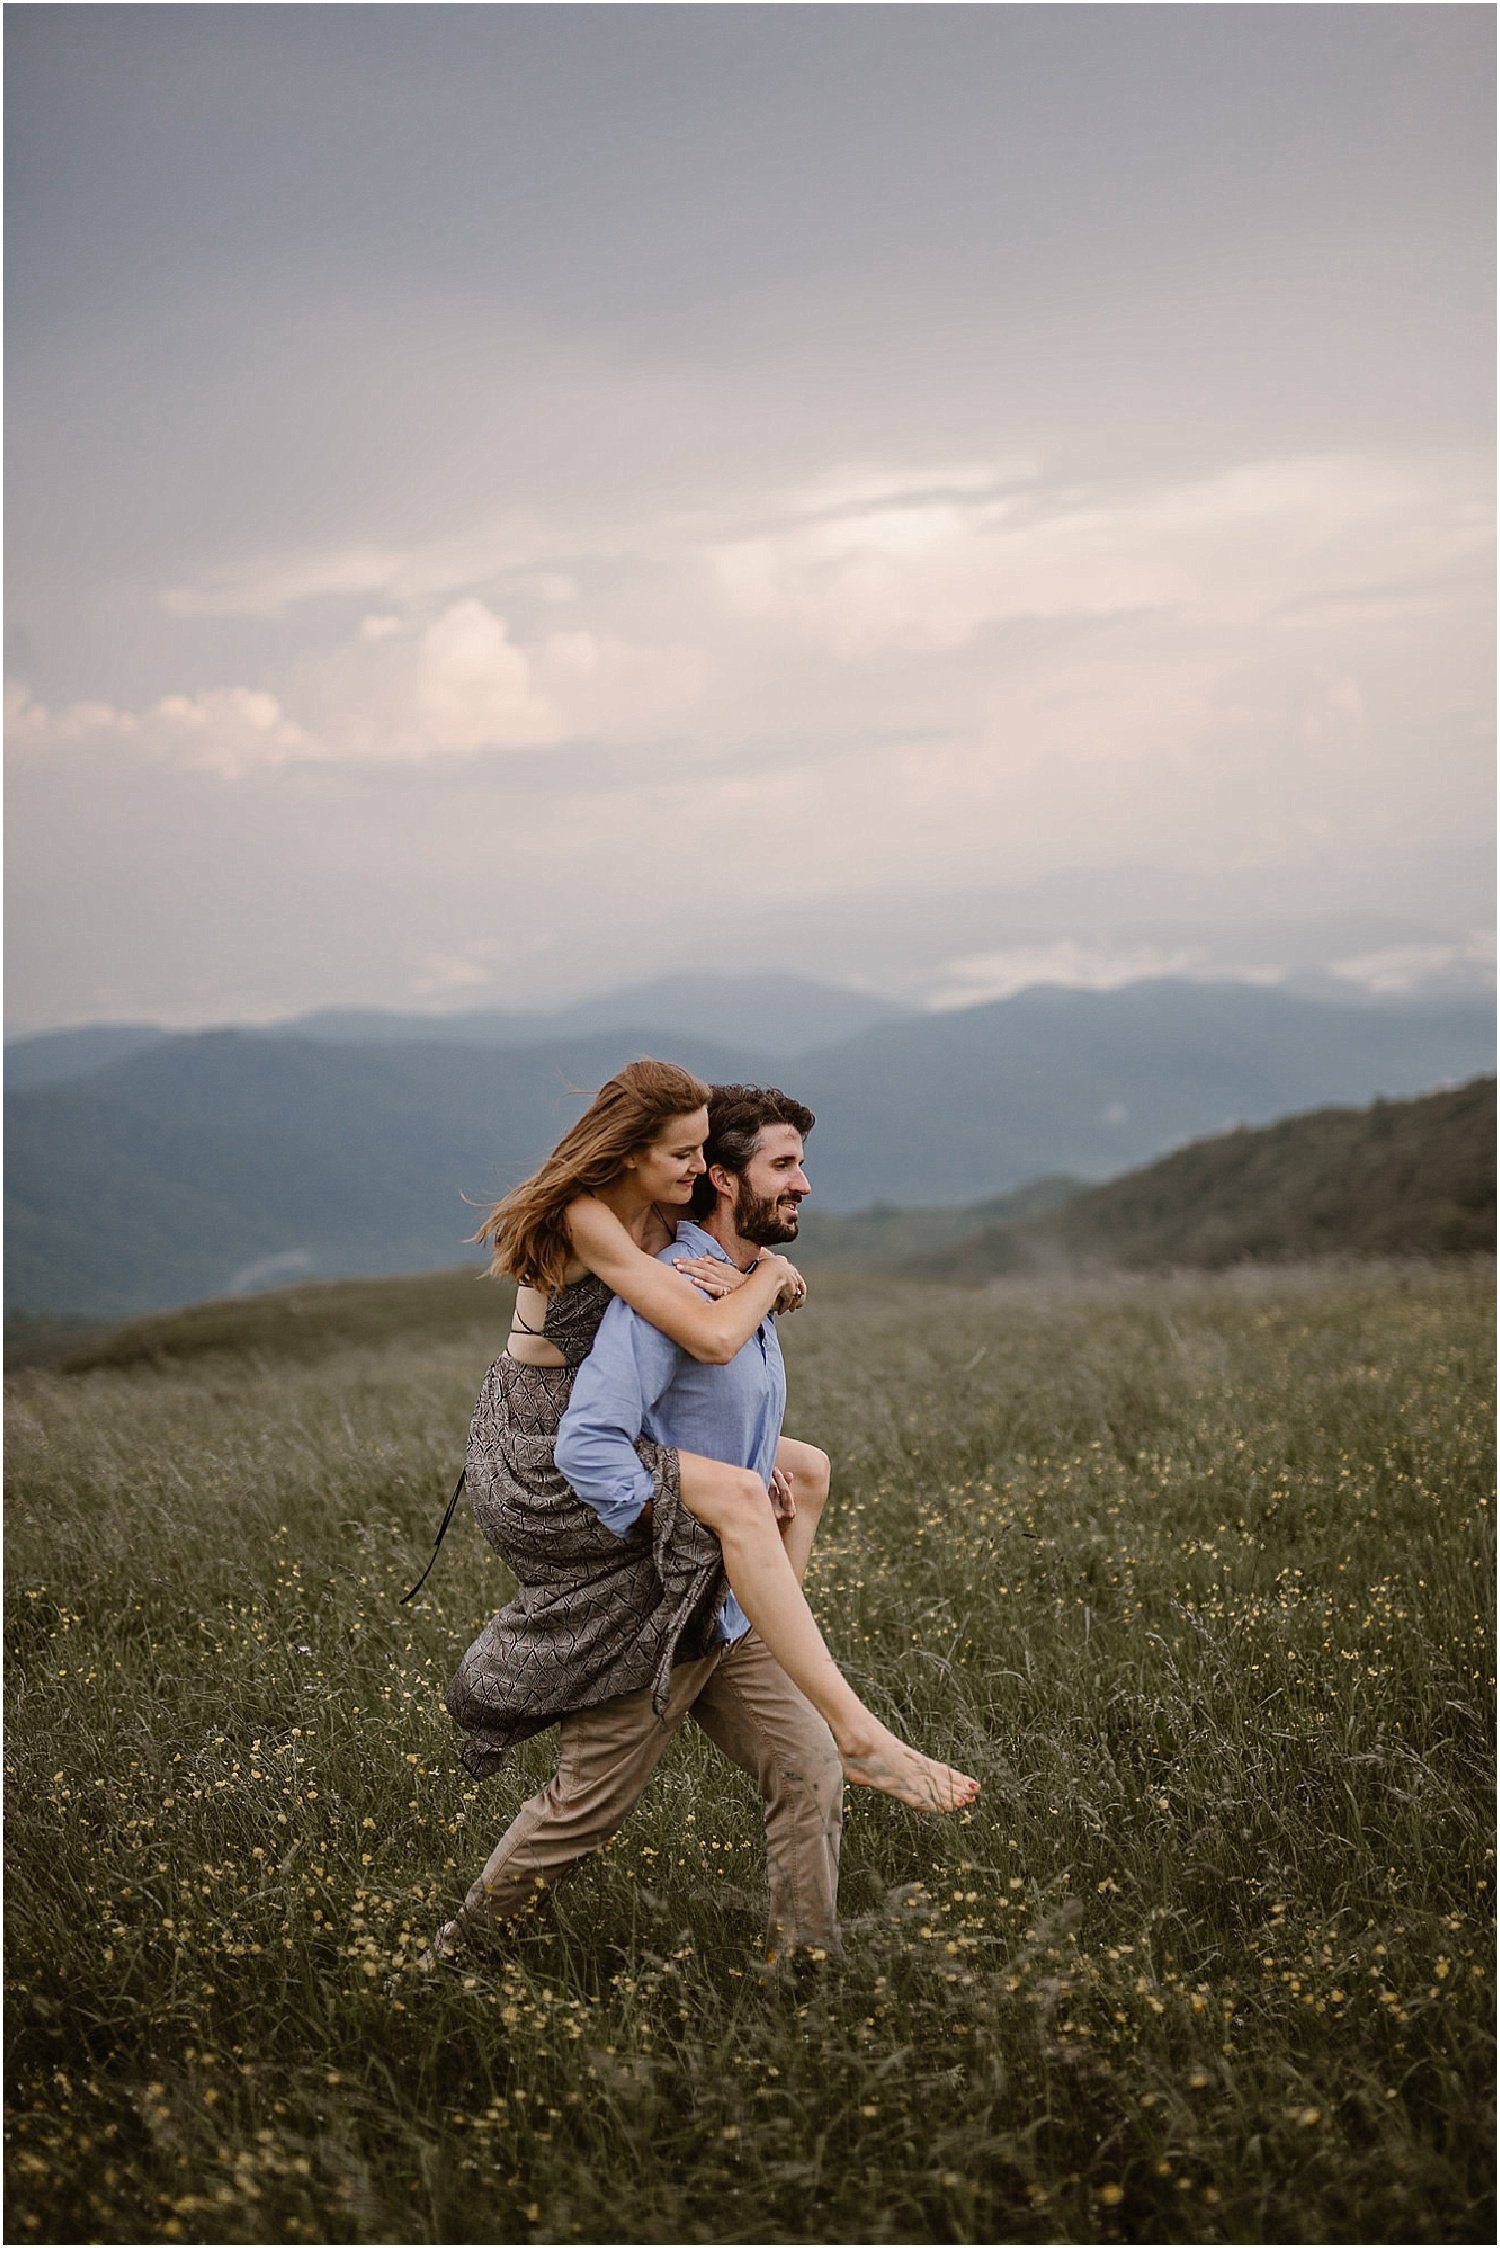 Max Patch Engagement Photos by Erin Morrison Photography